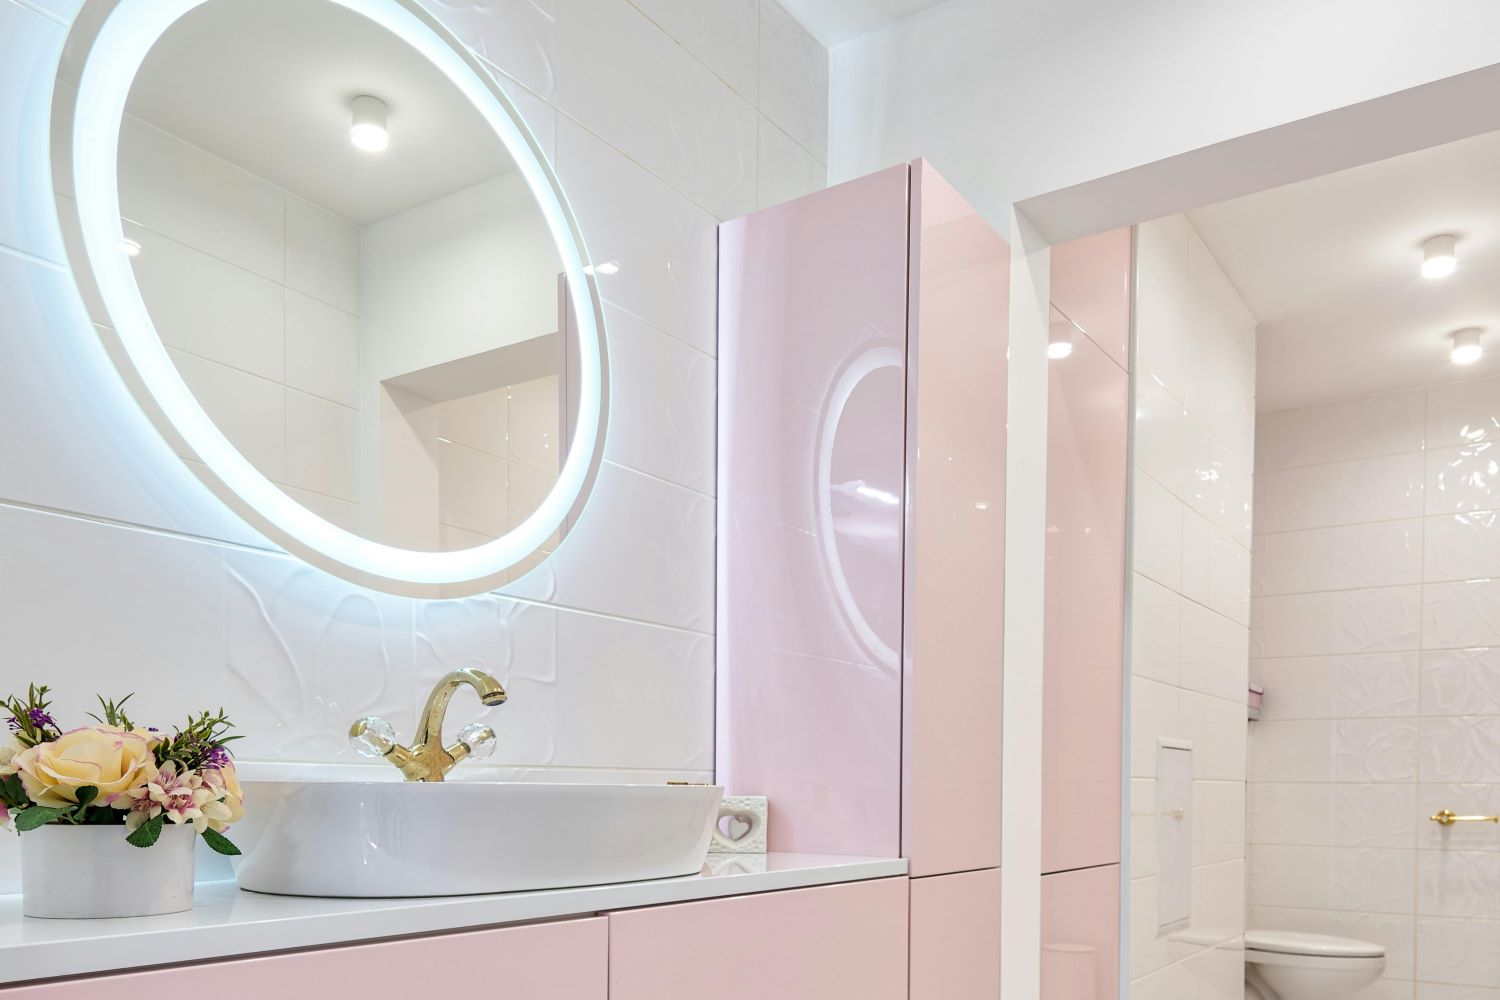 Interior of modern bathroom with glowing mirror